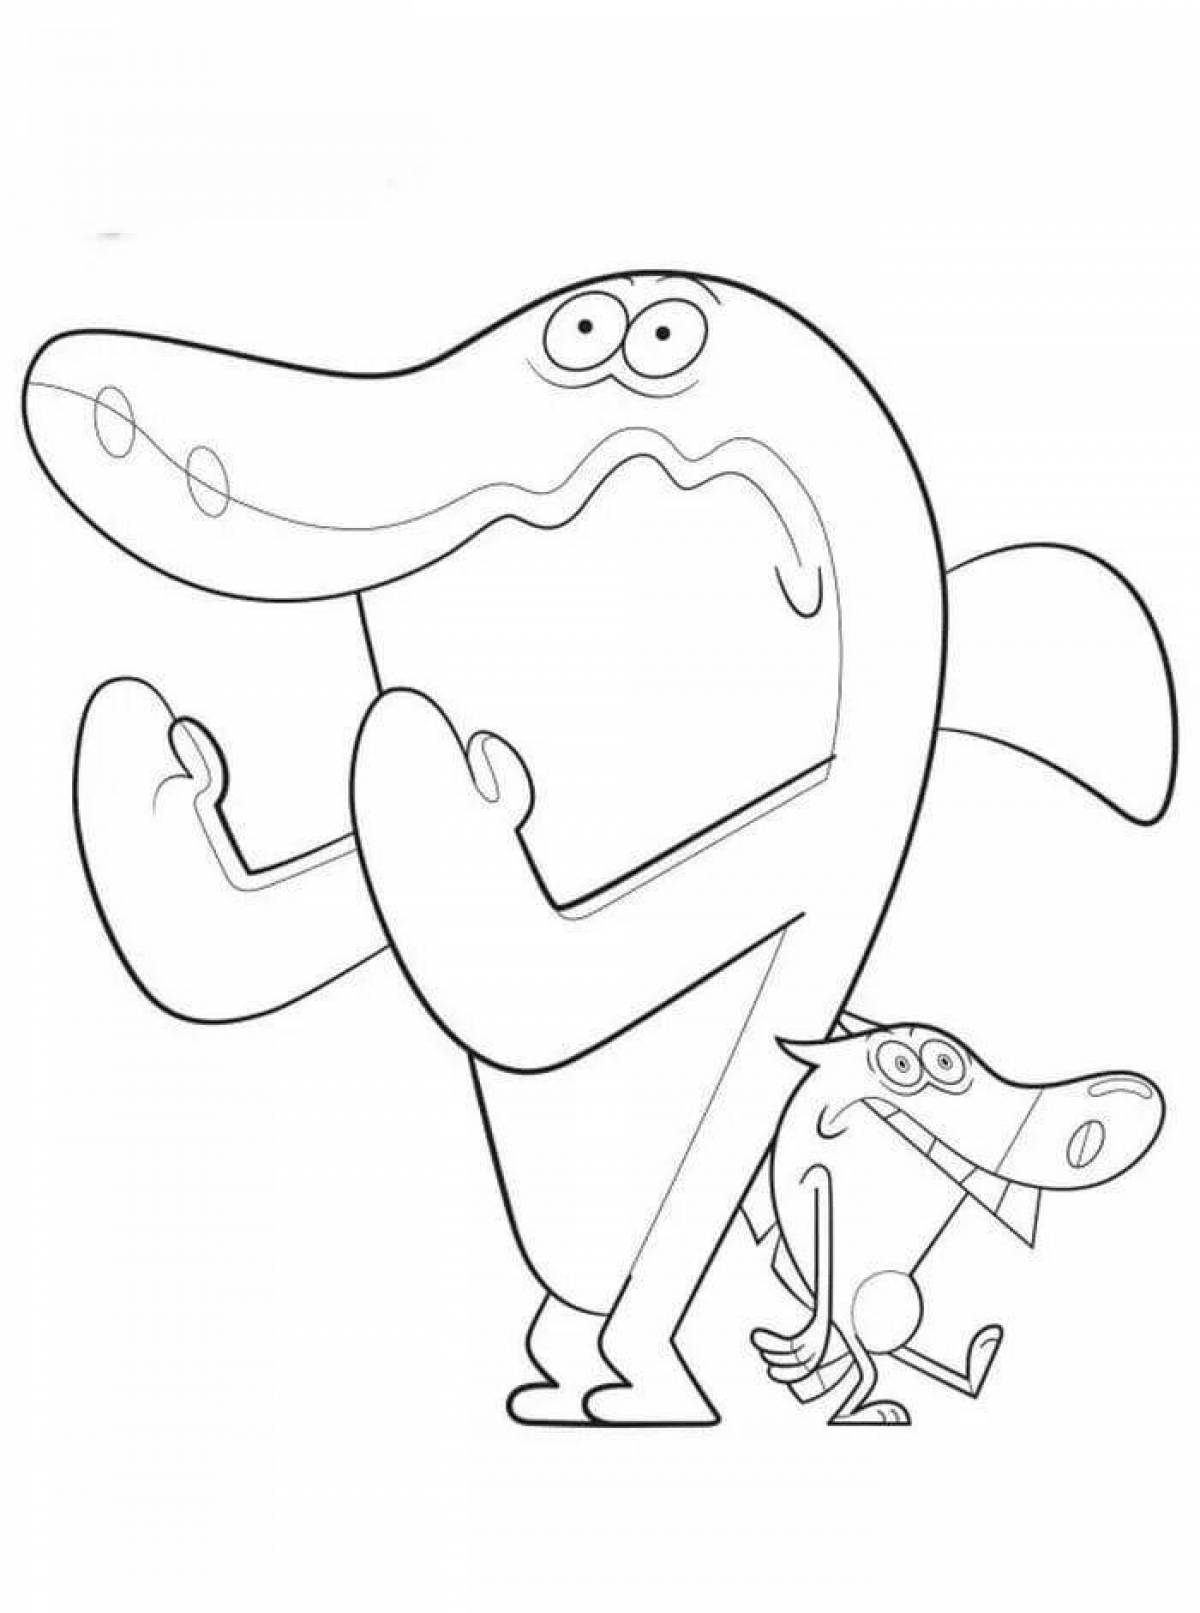 Zig and Sharko's adorable coloring book